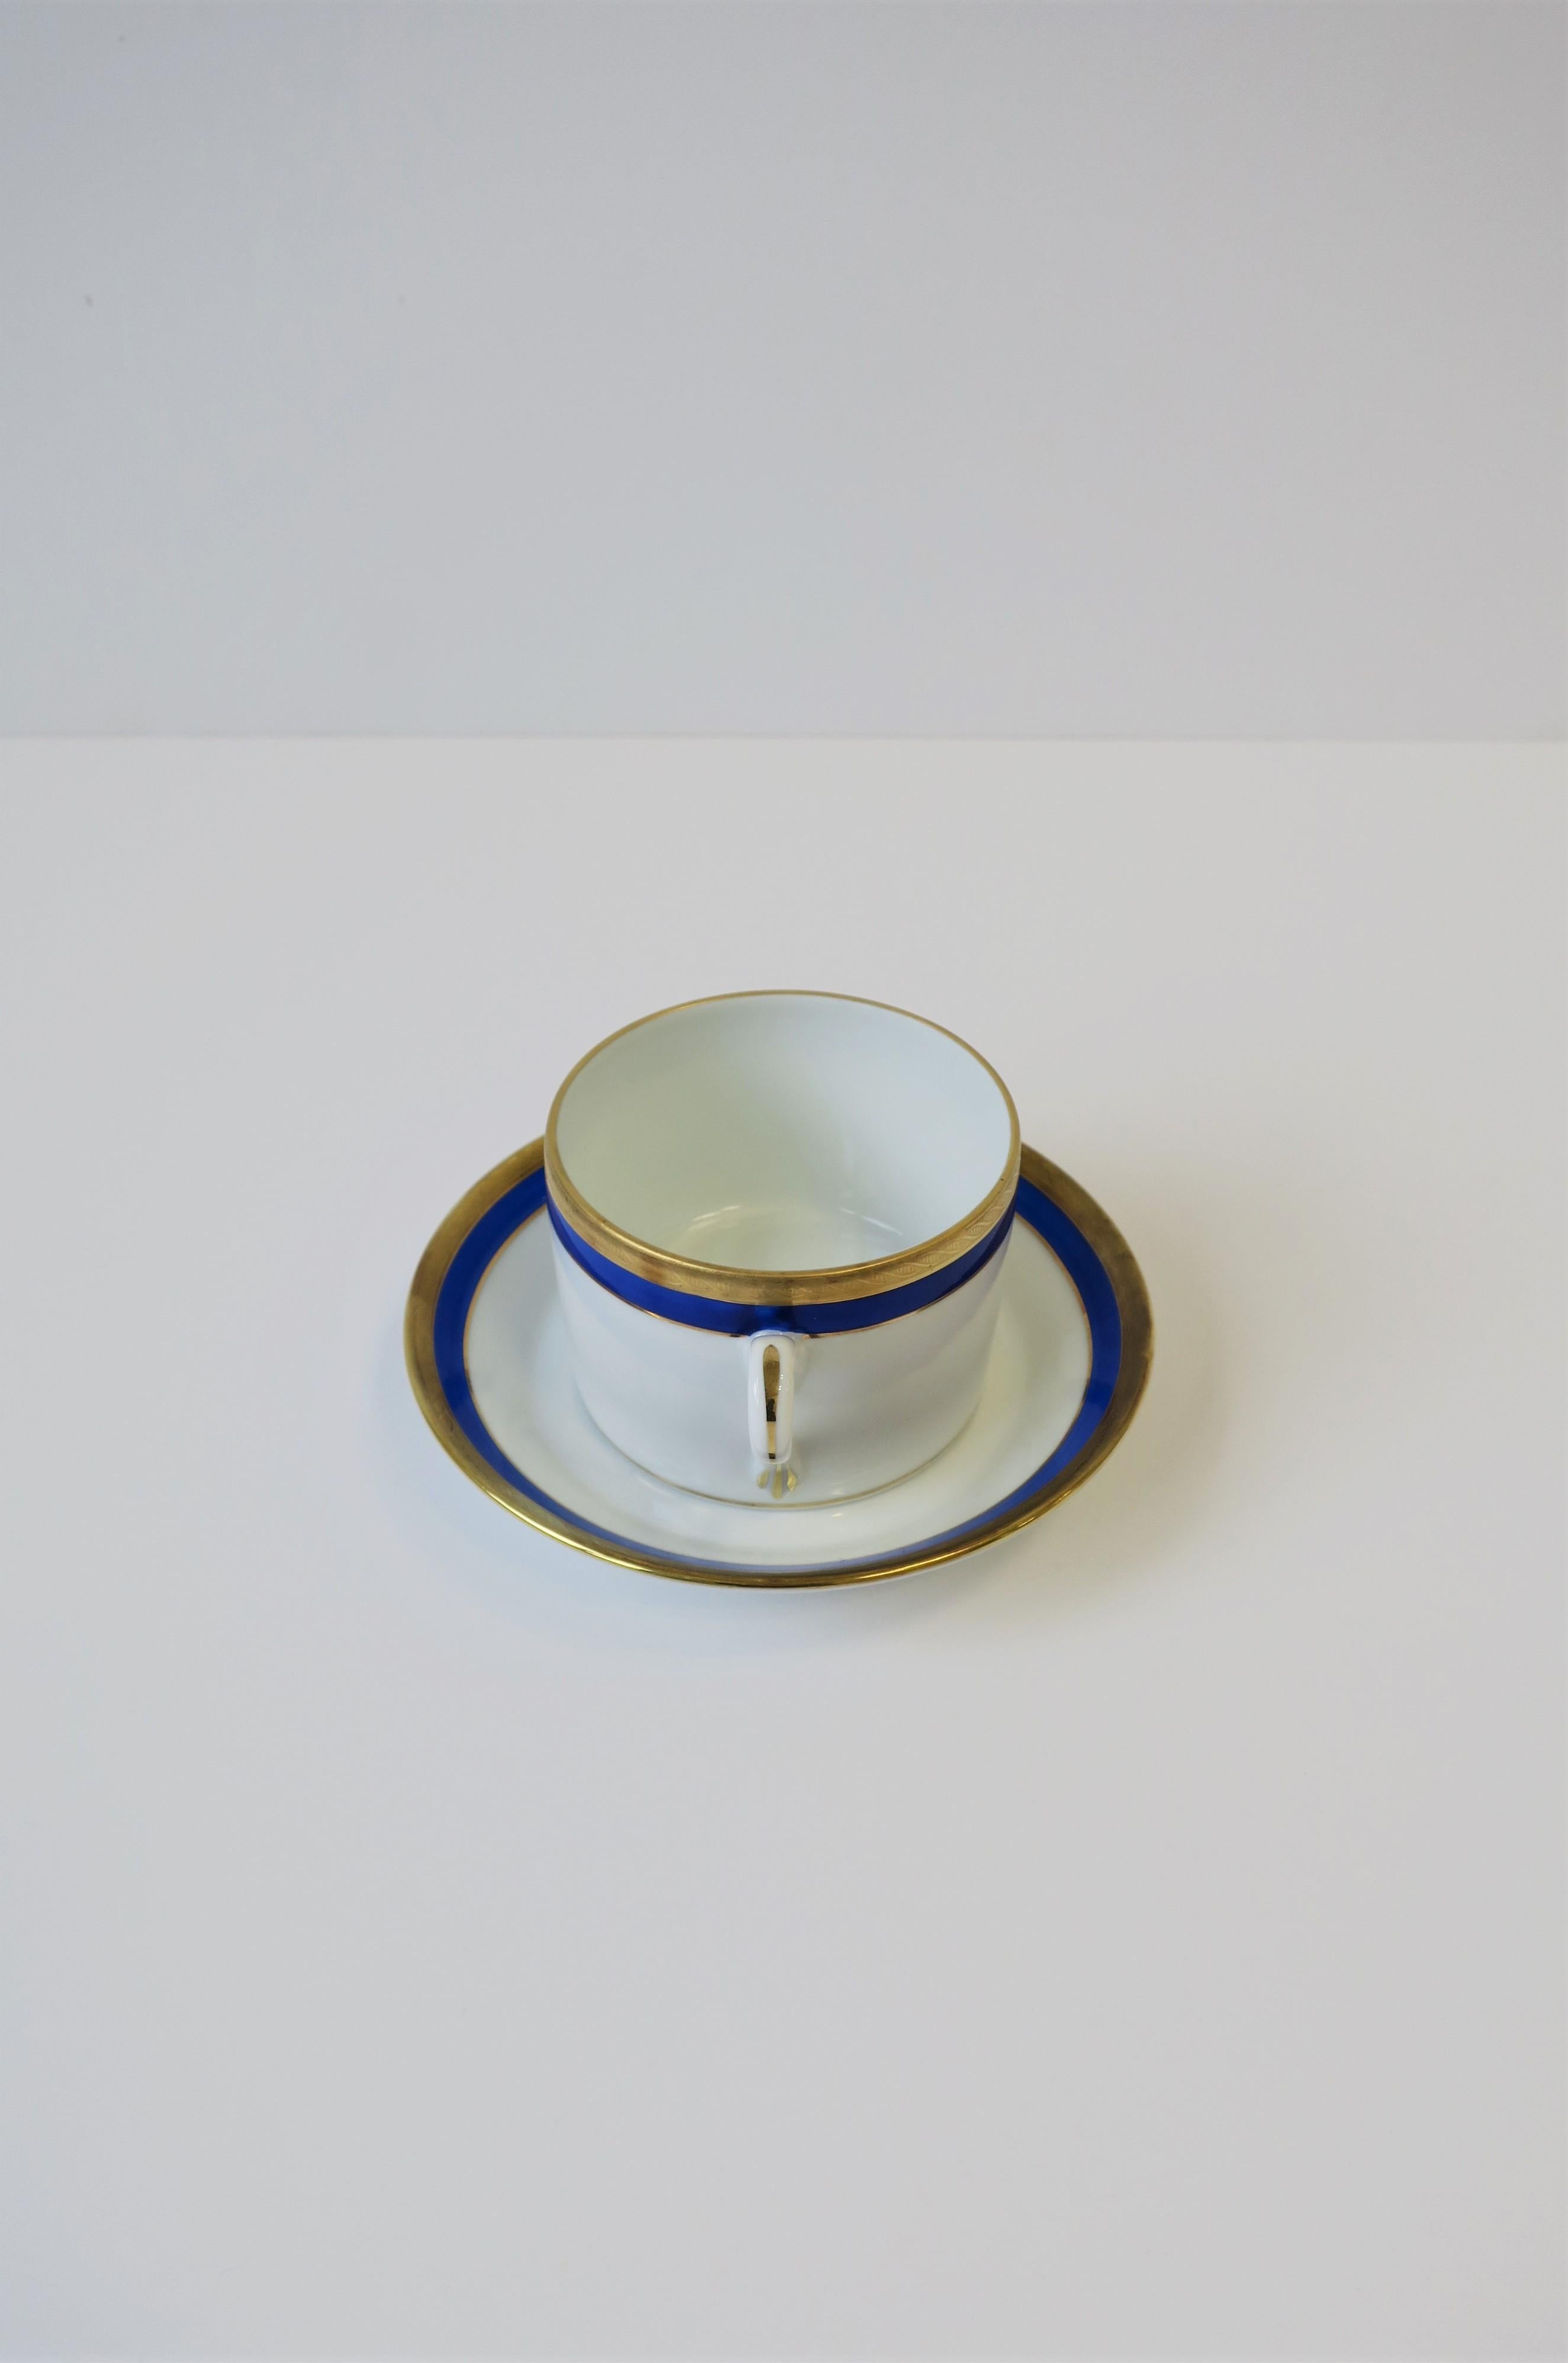 Richard Ginori Designer Italian Coffee or Tea Cup and Saucer in Blue and Gold 2